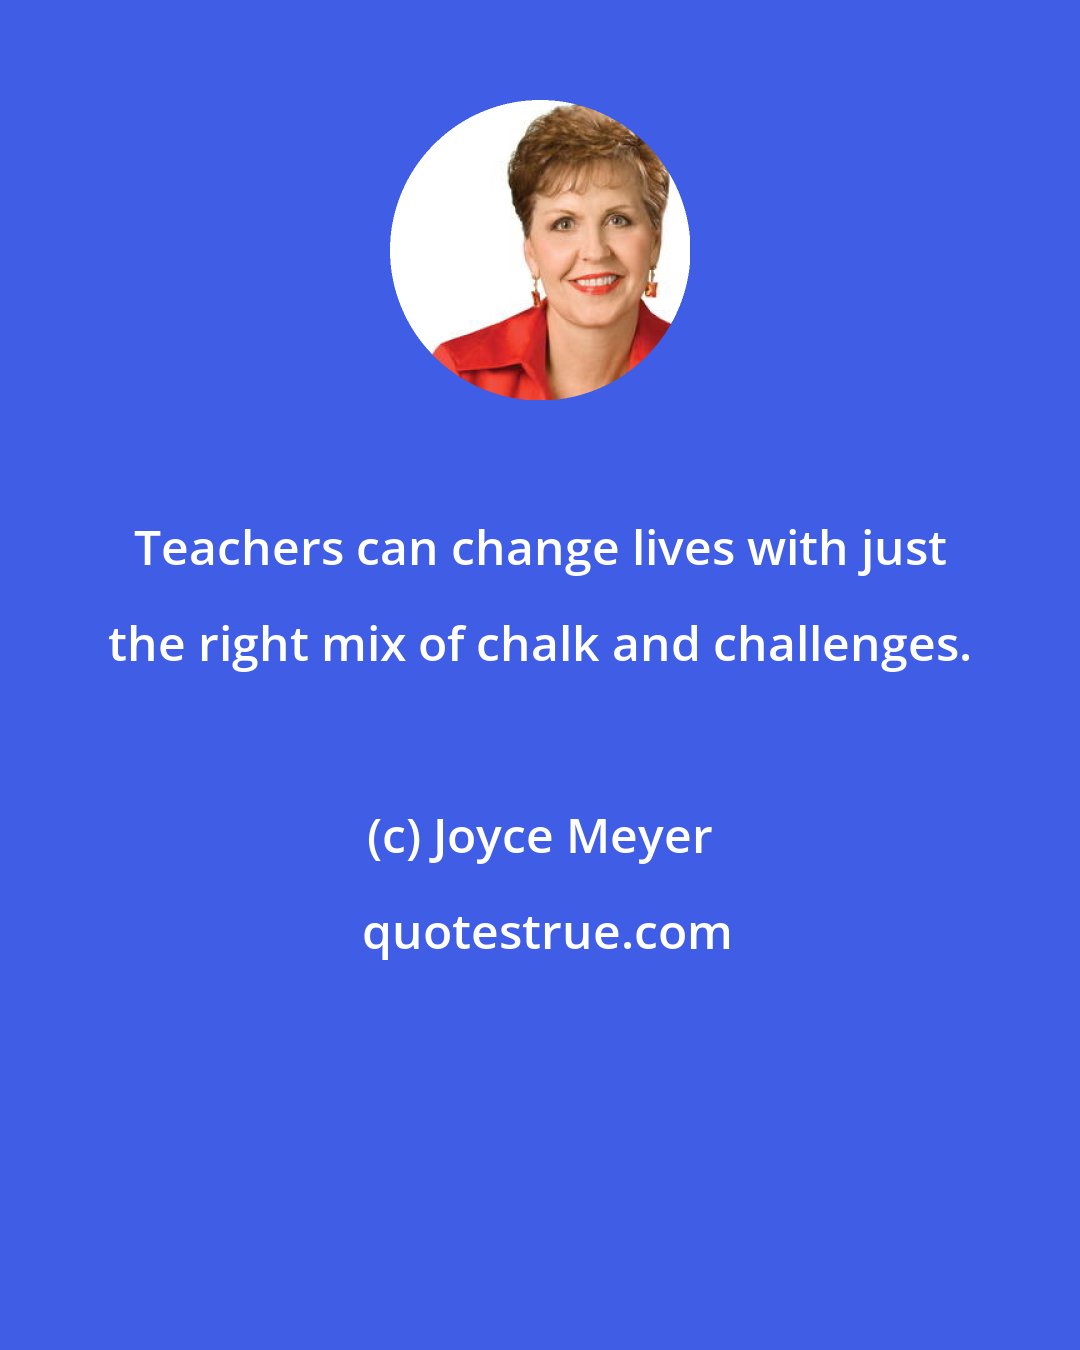 Joyce Meyer: Teachers can change lives with just the right mix of chalk and challenges.